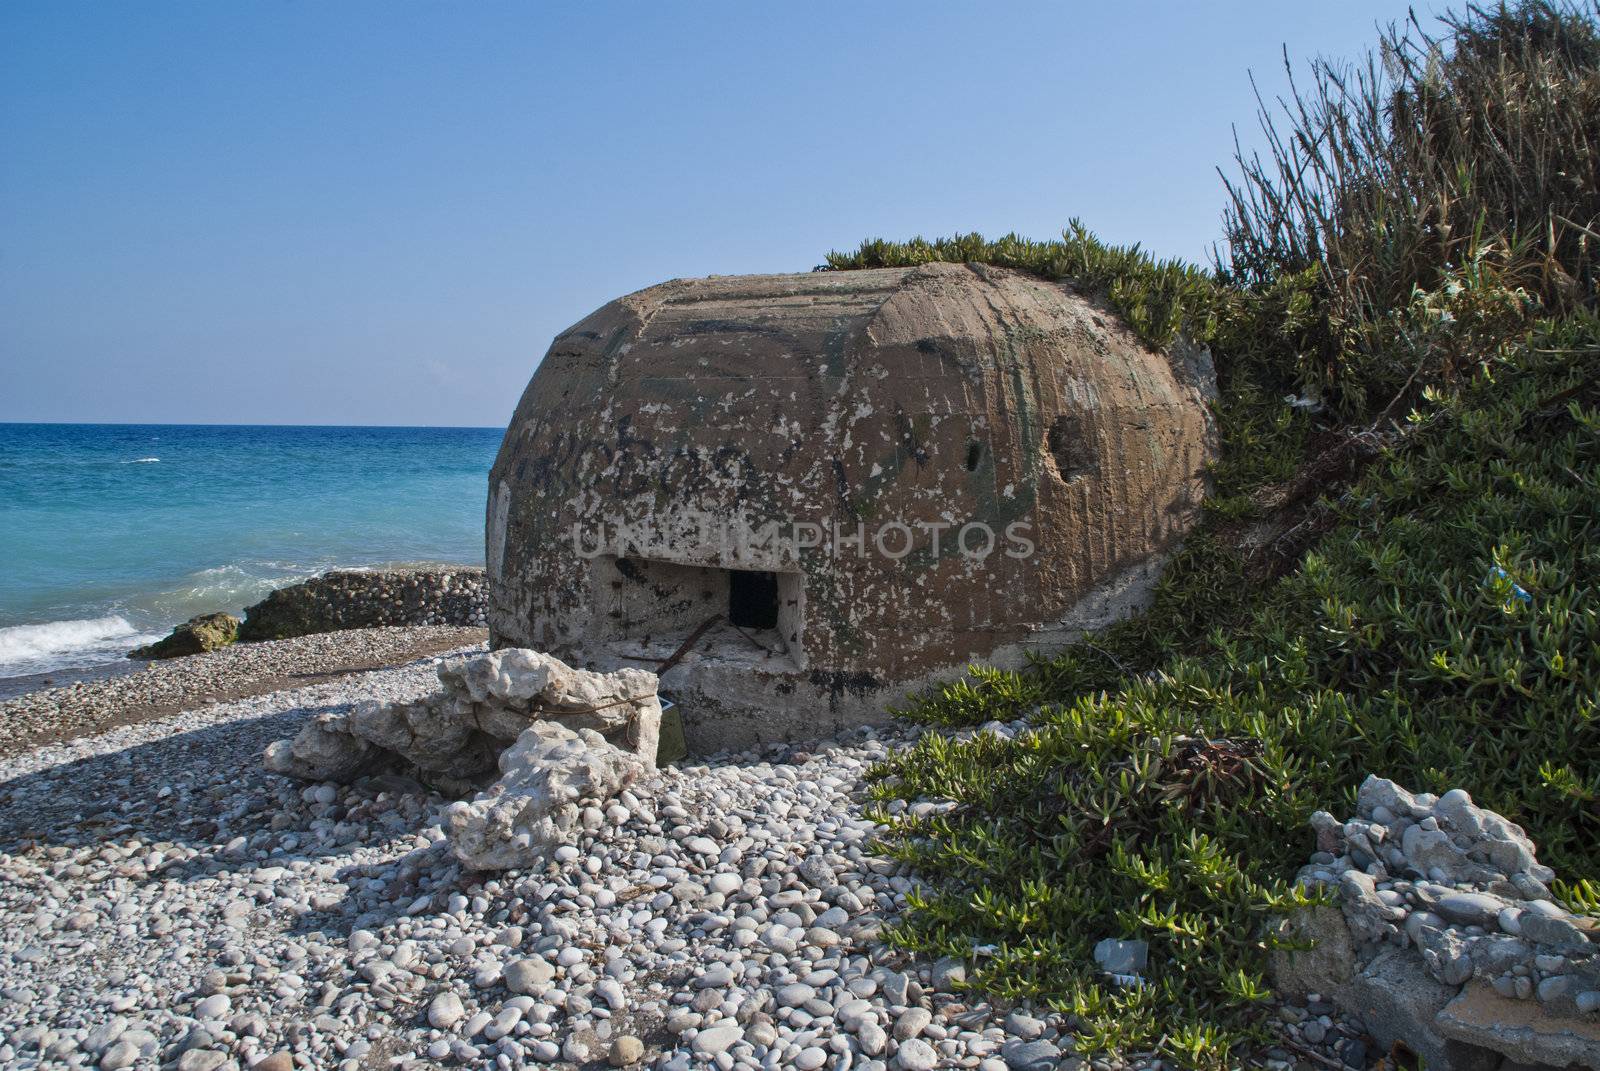 bunkers molded and constructed in concrete from the World War II located on the beach at Hotel Sun Beach Resort in Ixia, Rhodes. Image is shot on vacation in Rhodes autumn 2012.